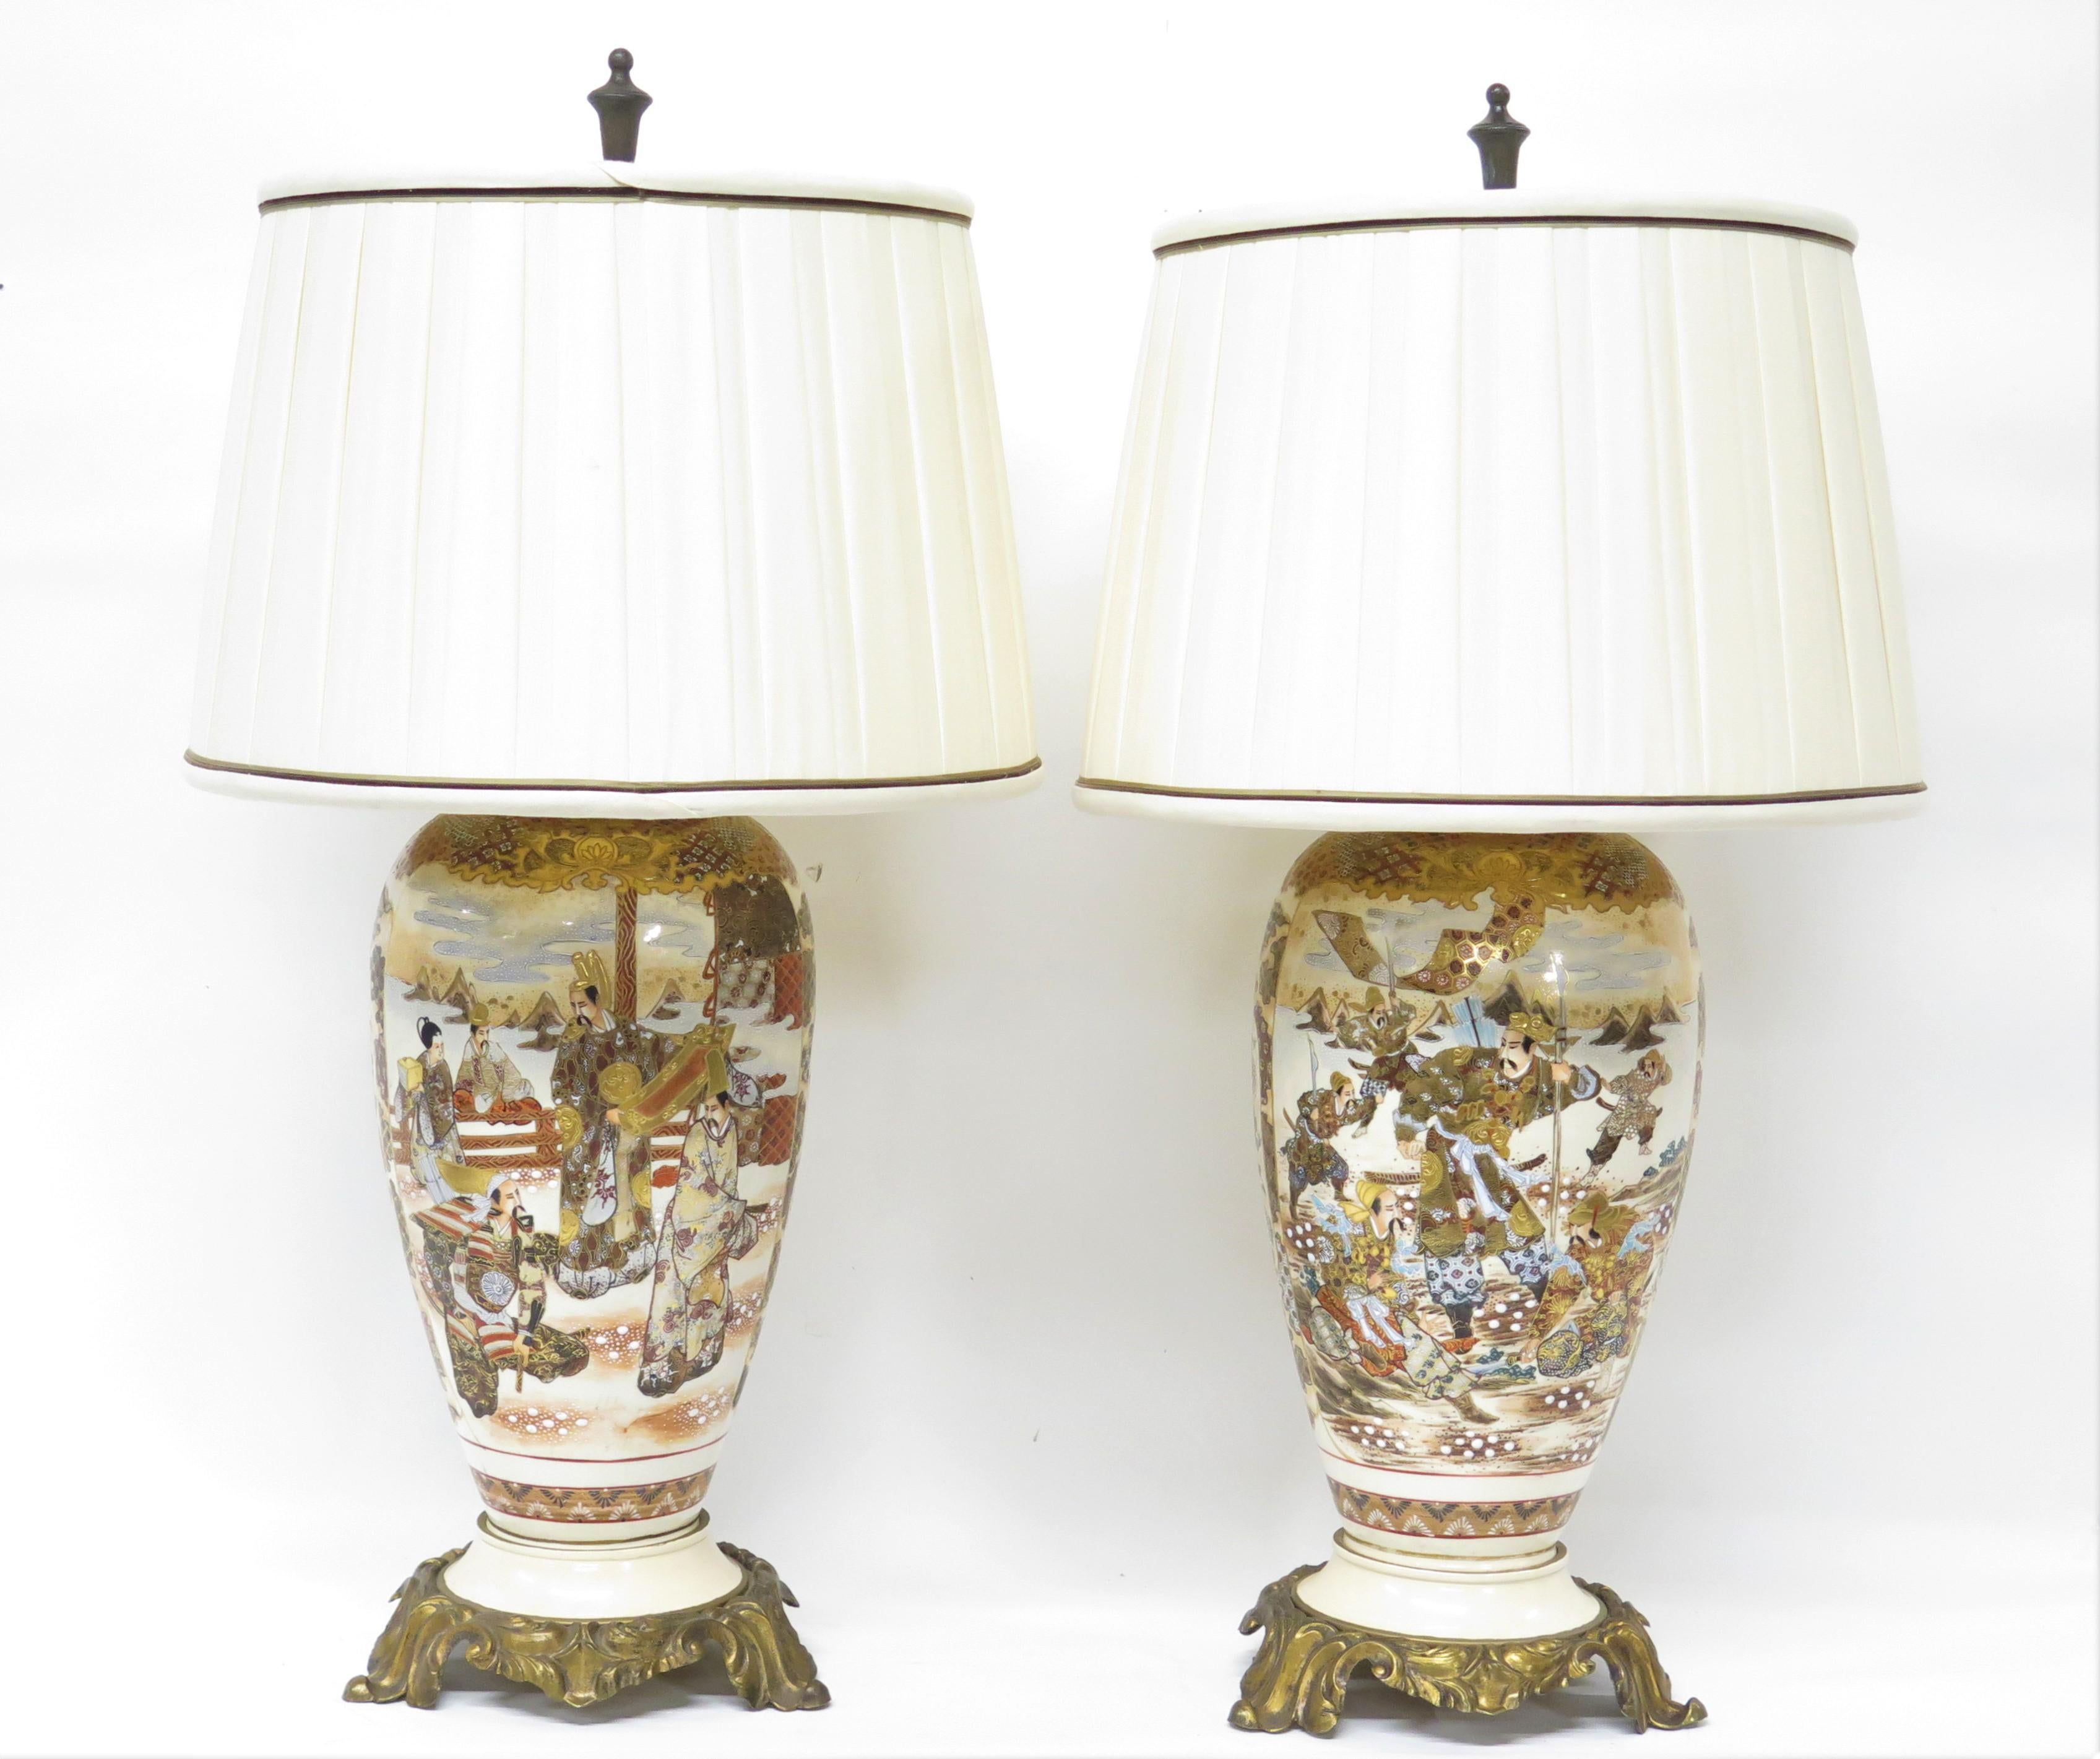 Pair of Satsuma vases on later bronze bases as lamps with custom shades, Japan. Late 19th/ early 20th Century.